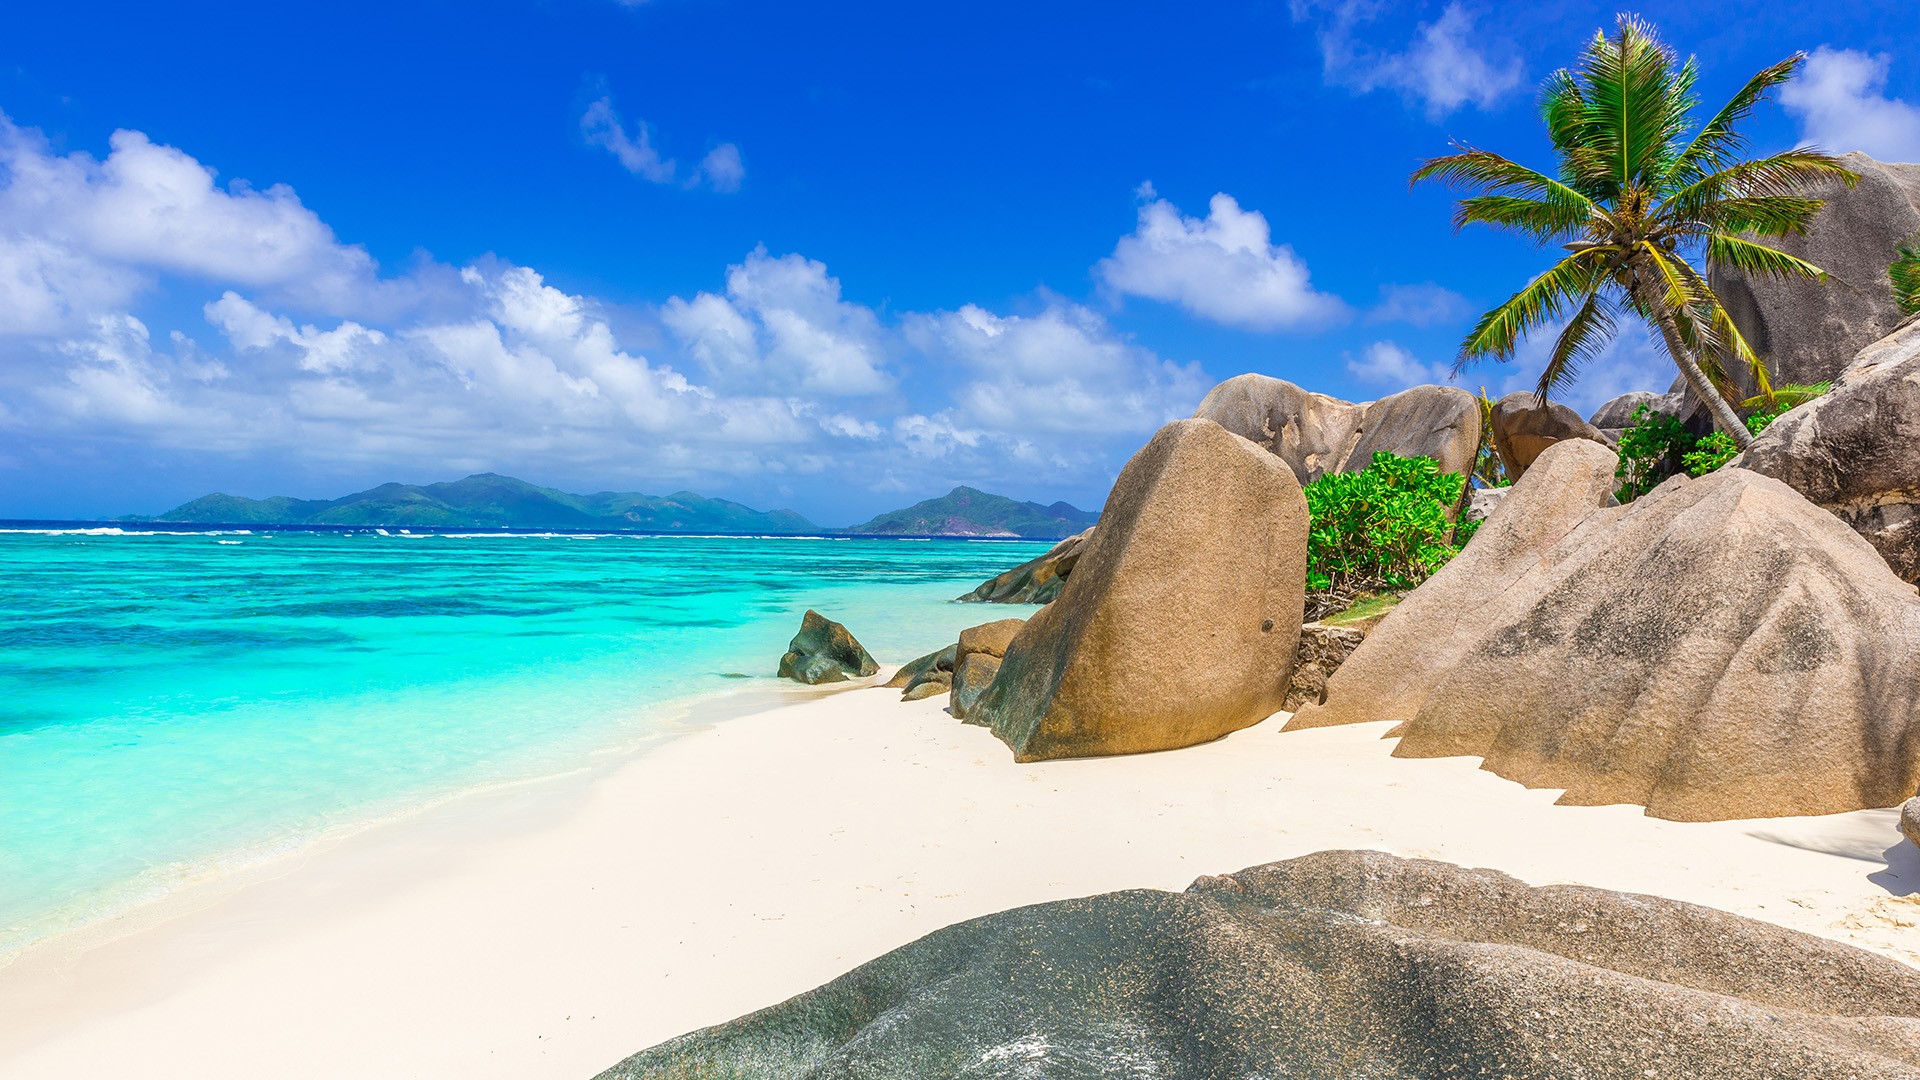 General 1920x1080 nature landscape mountains clouds sky beach rocks sand water clear water trees Seychelles